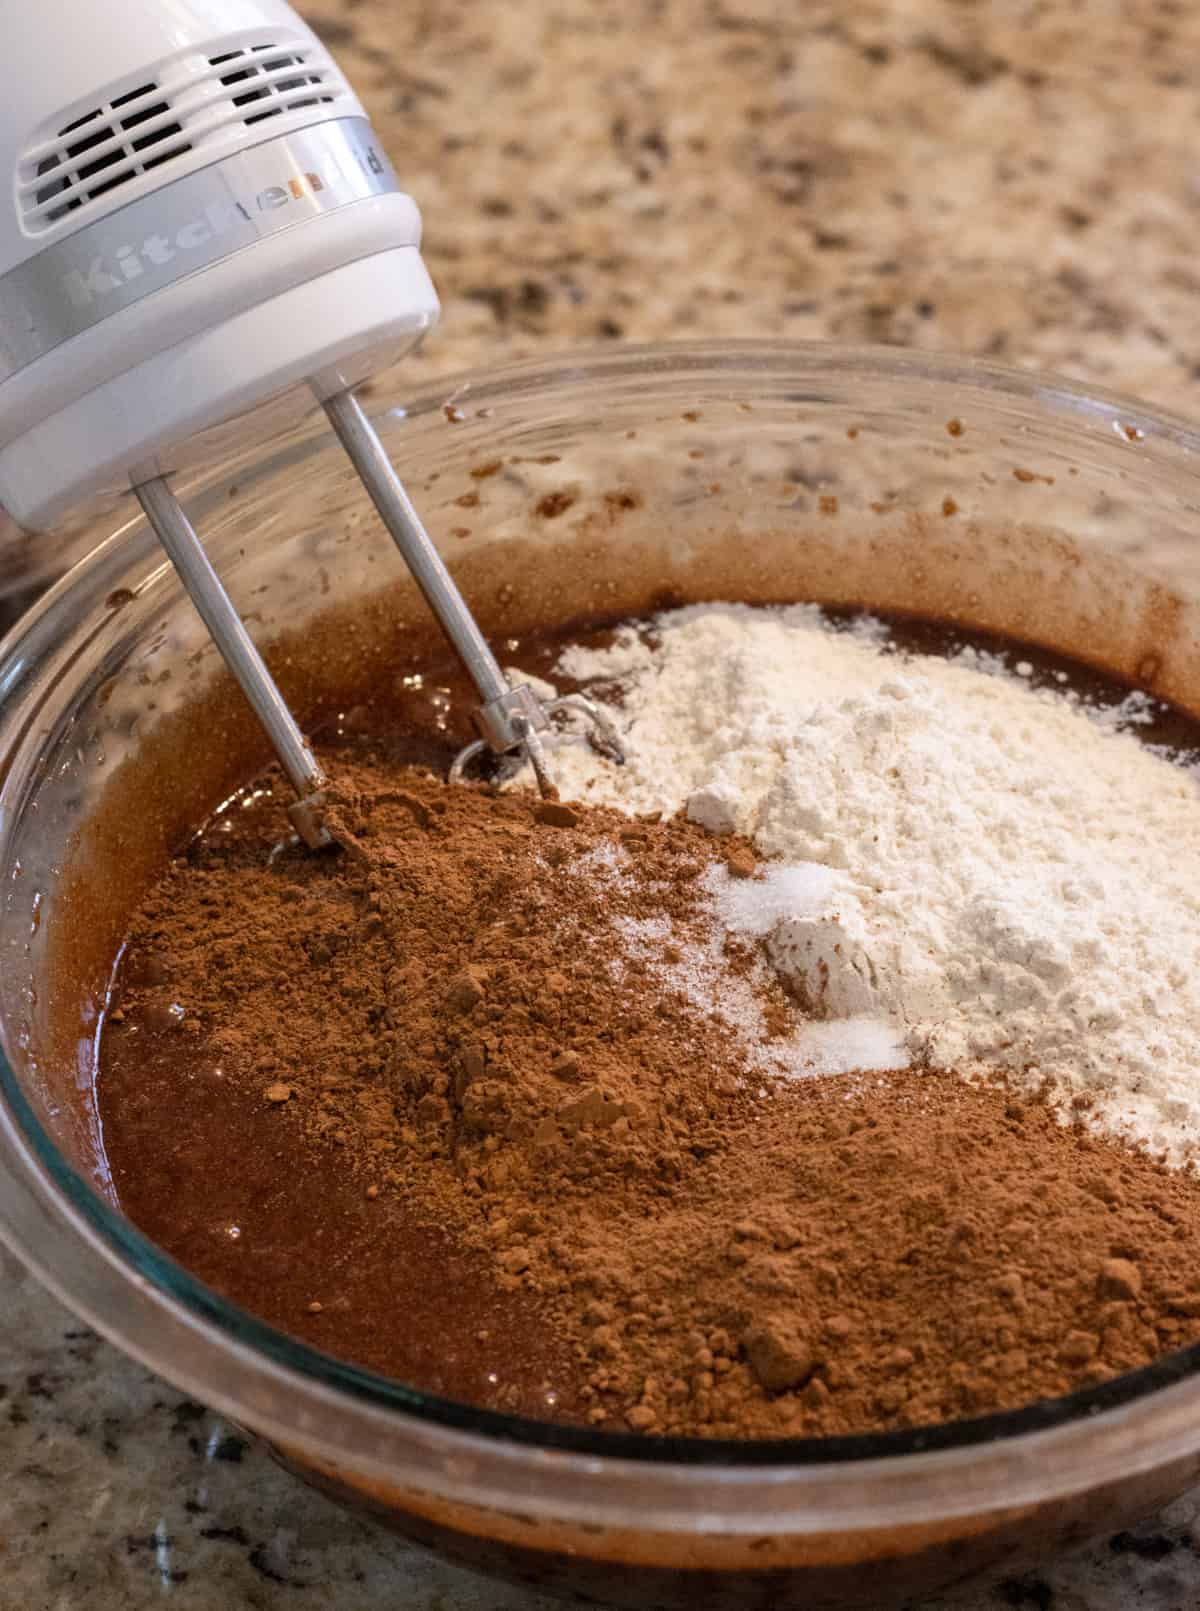 Flour and cocoa powder in a glass bowl with brownie batter and an electric whisk.